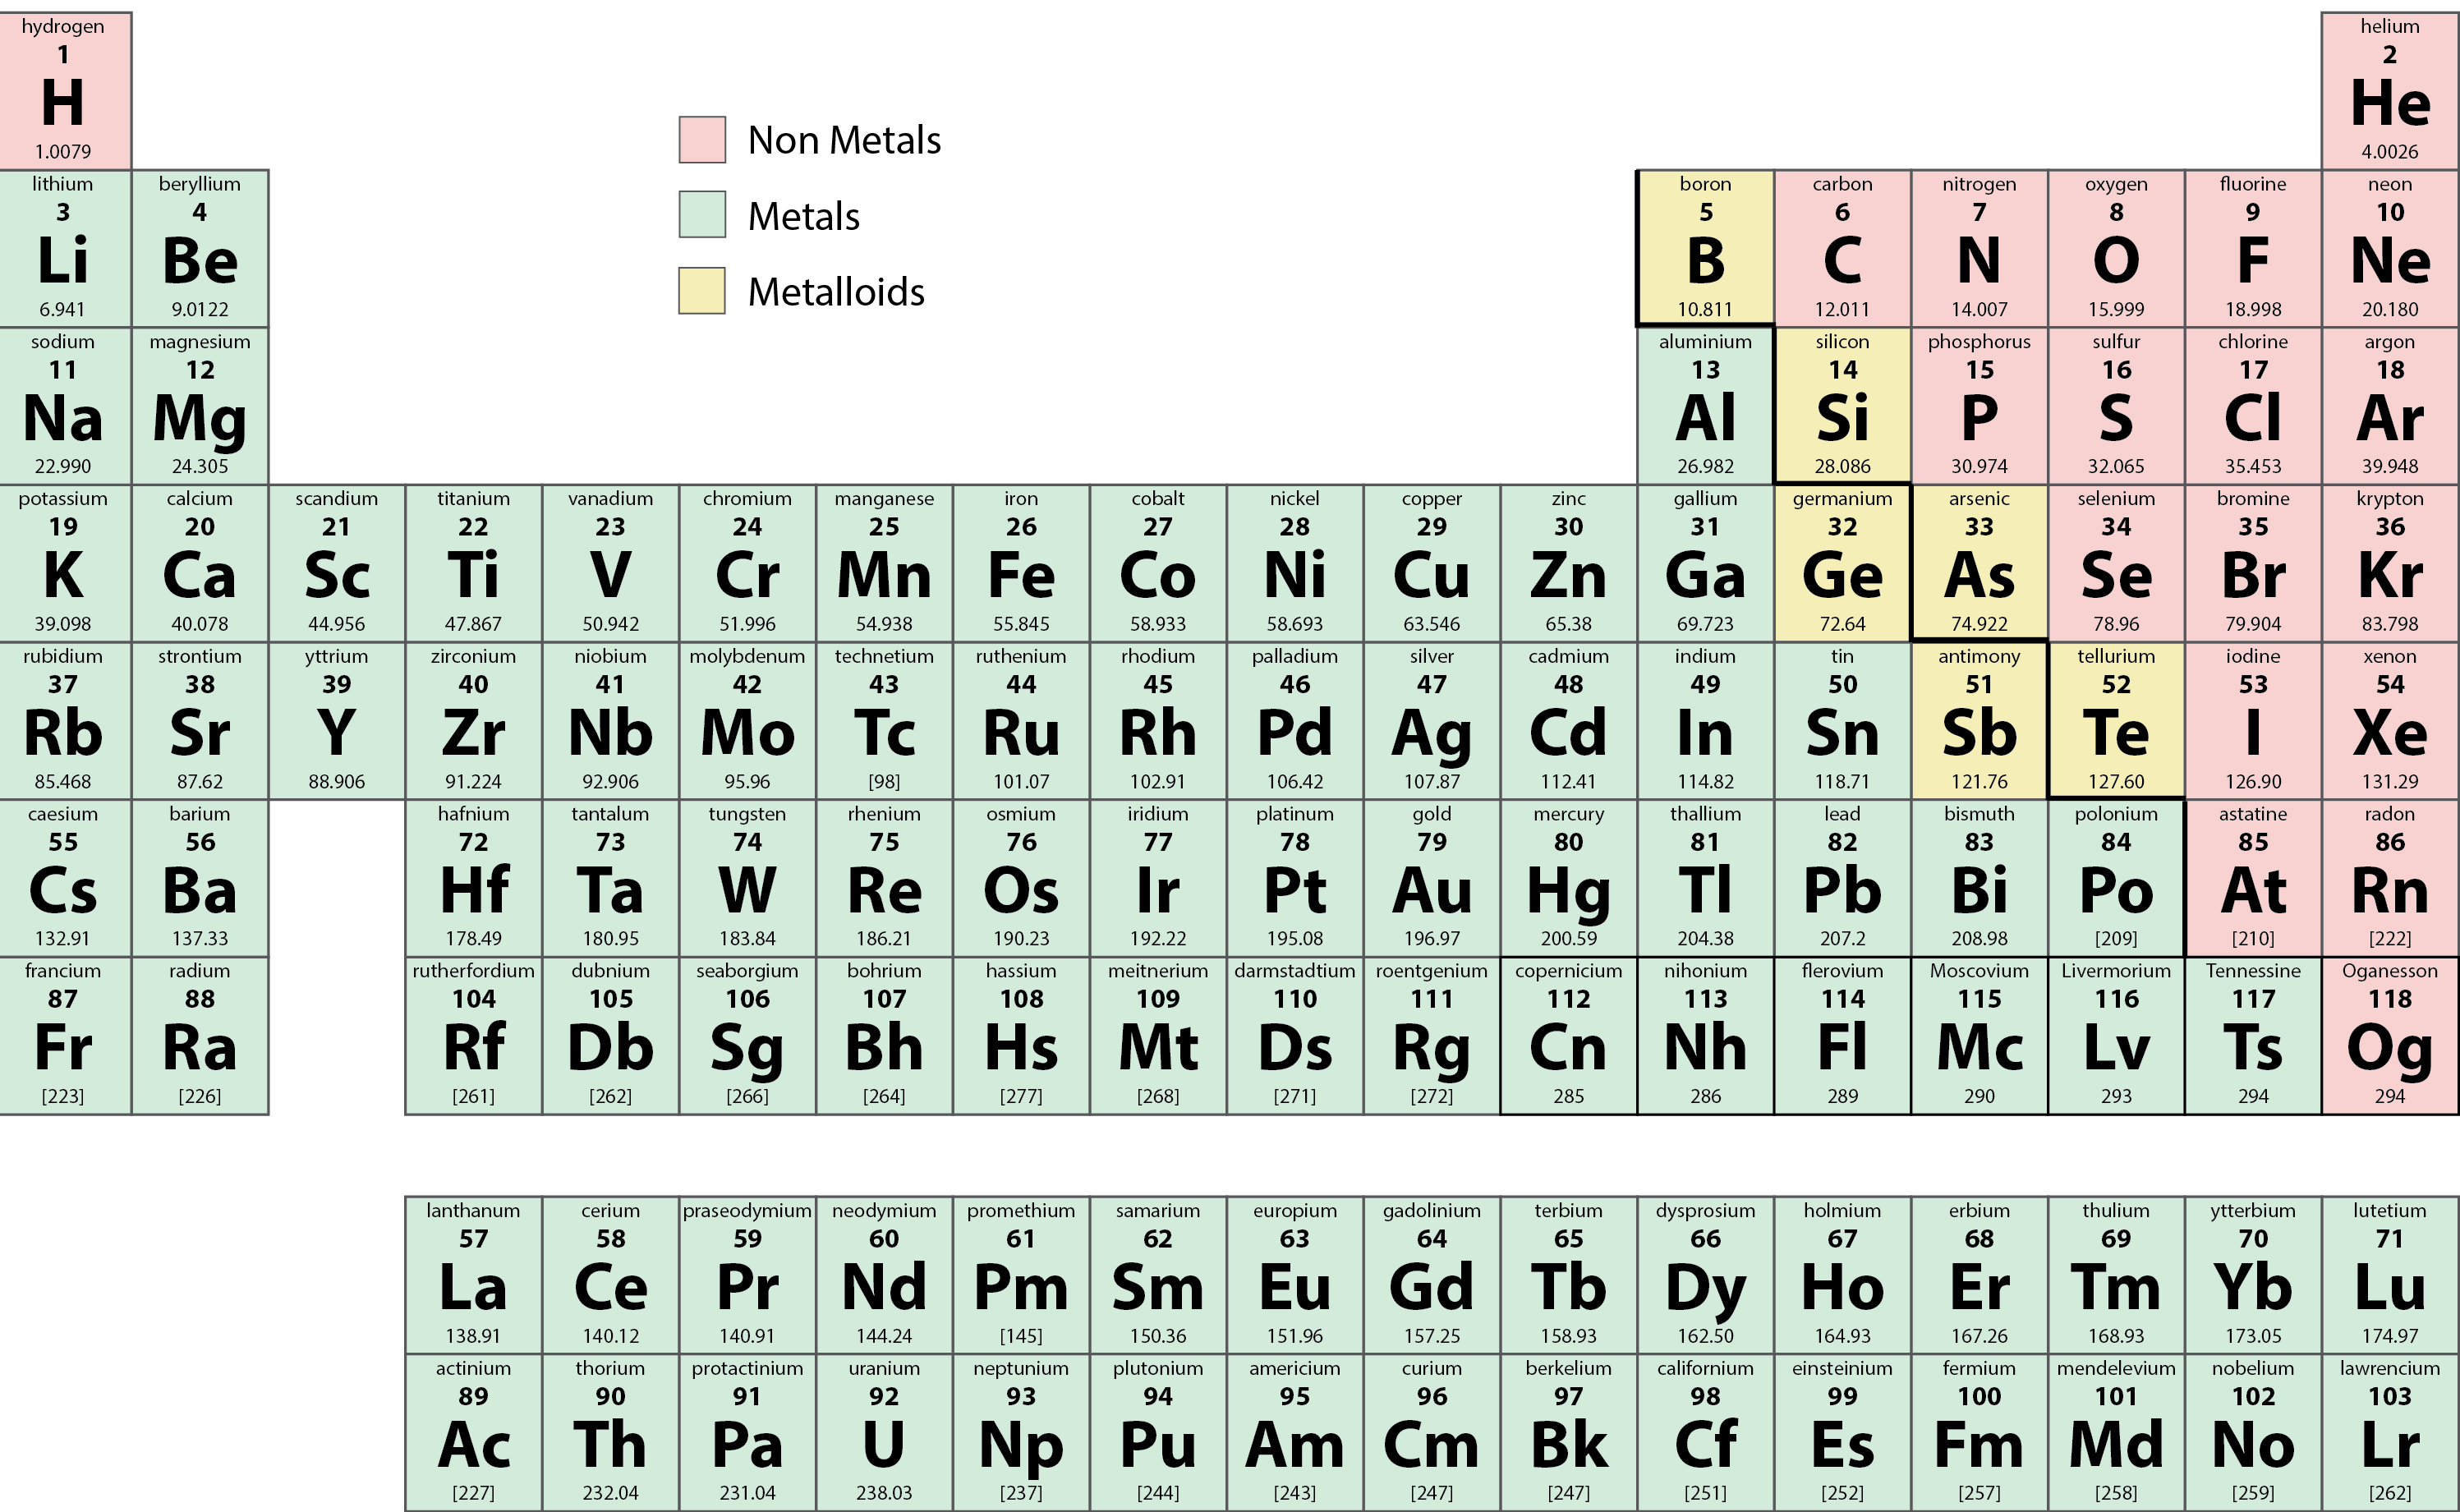 In this figure, a periodic table is shown with the metals, nonmetals and metalloids distinguished and highlighted.